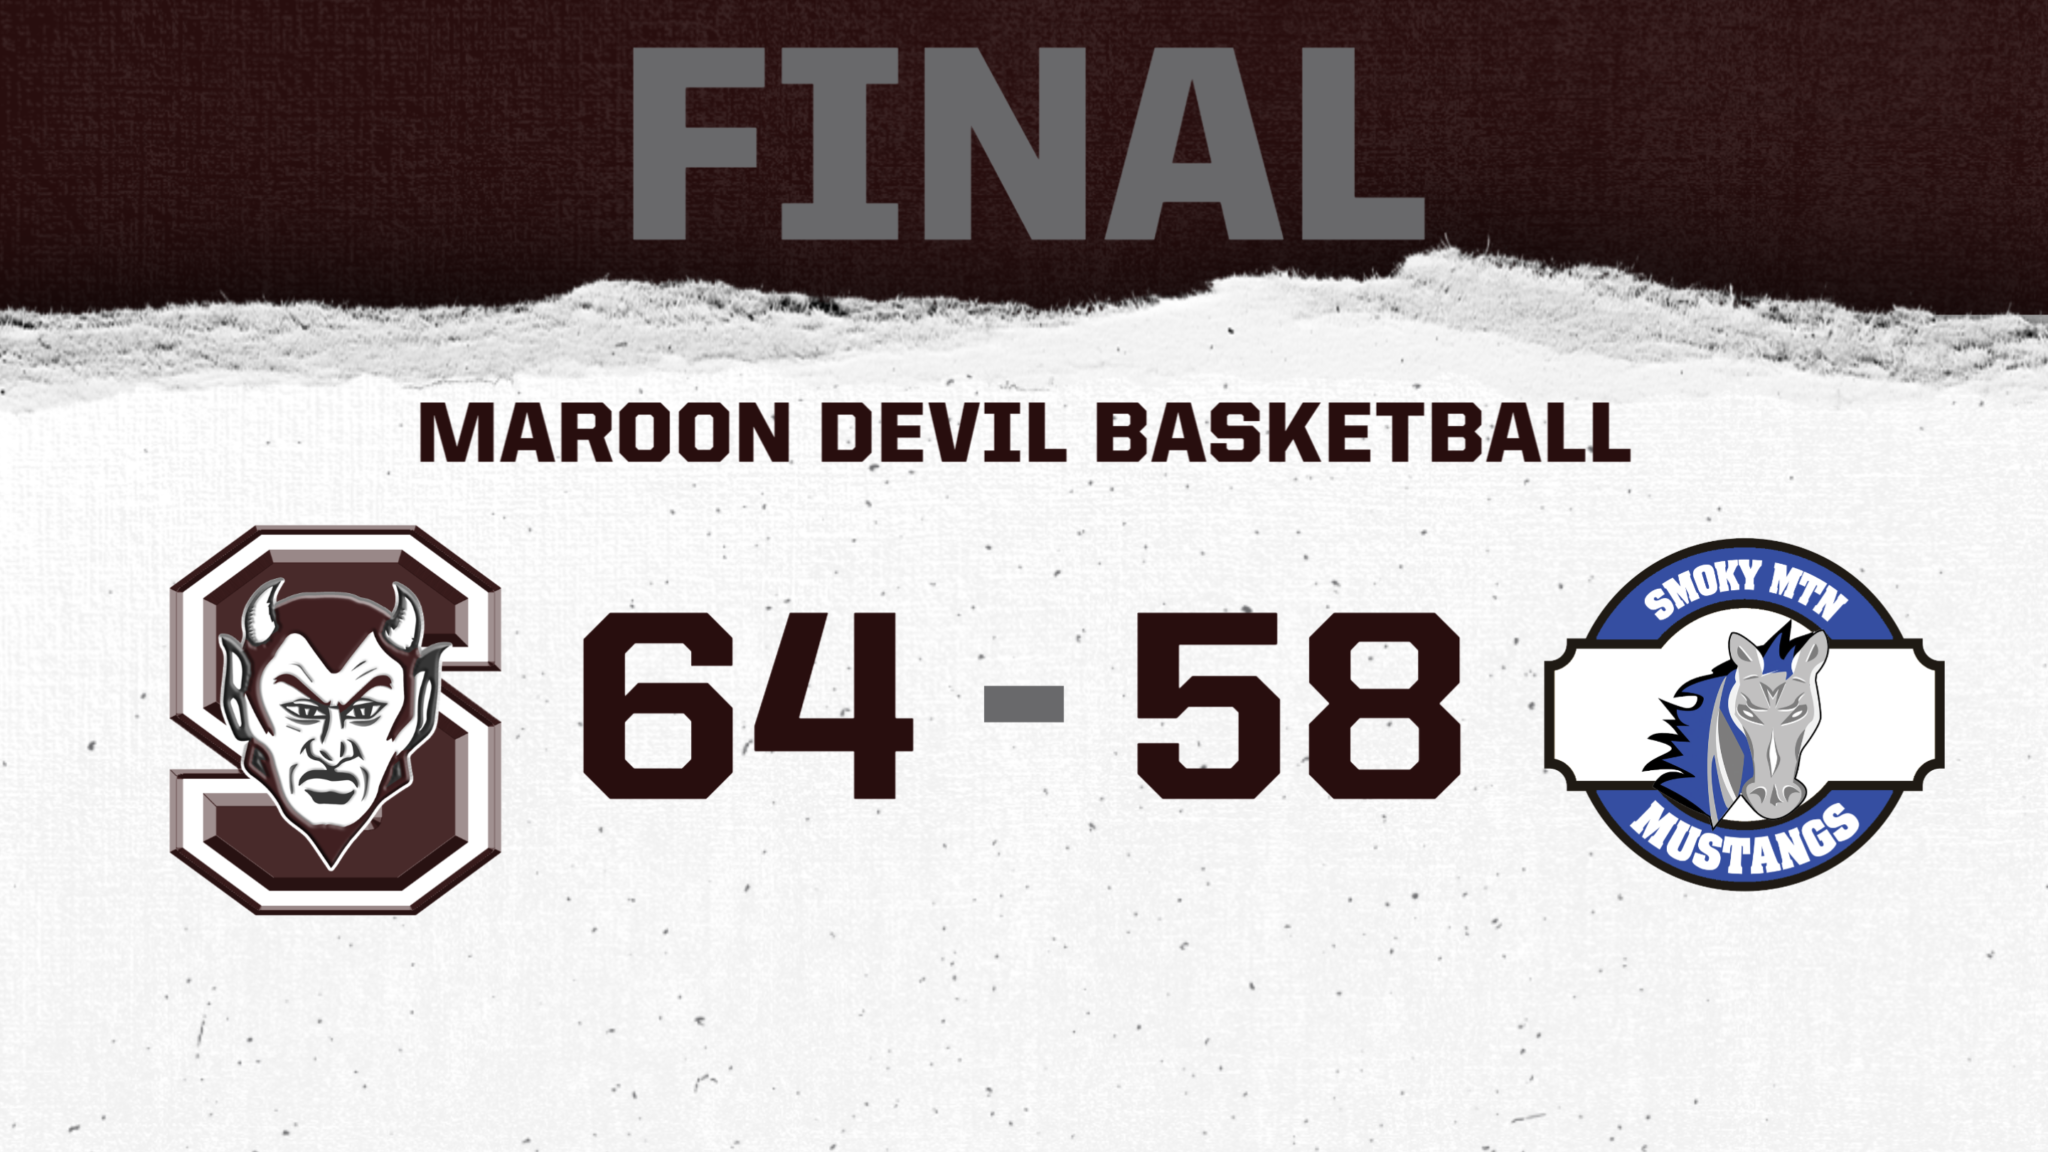 final score of a game that ended at 64-58, maroon devil team as winners